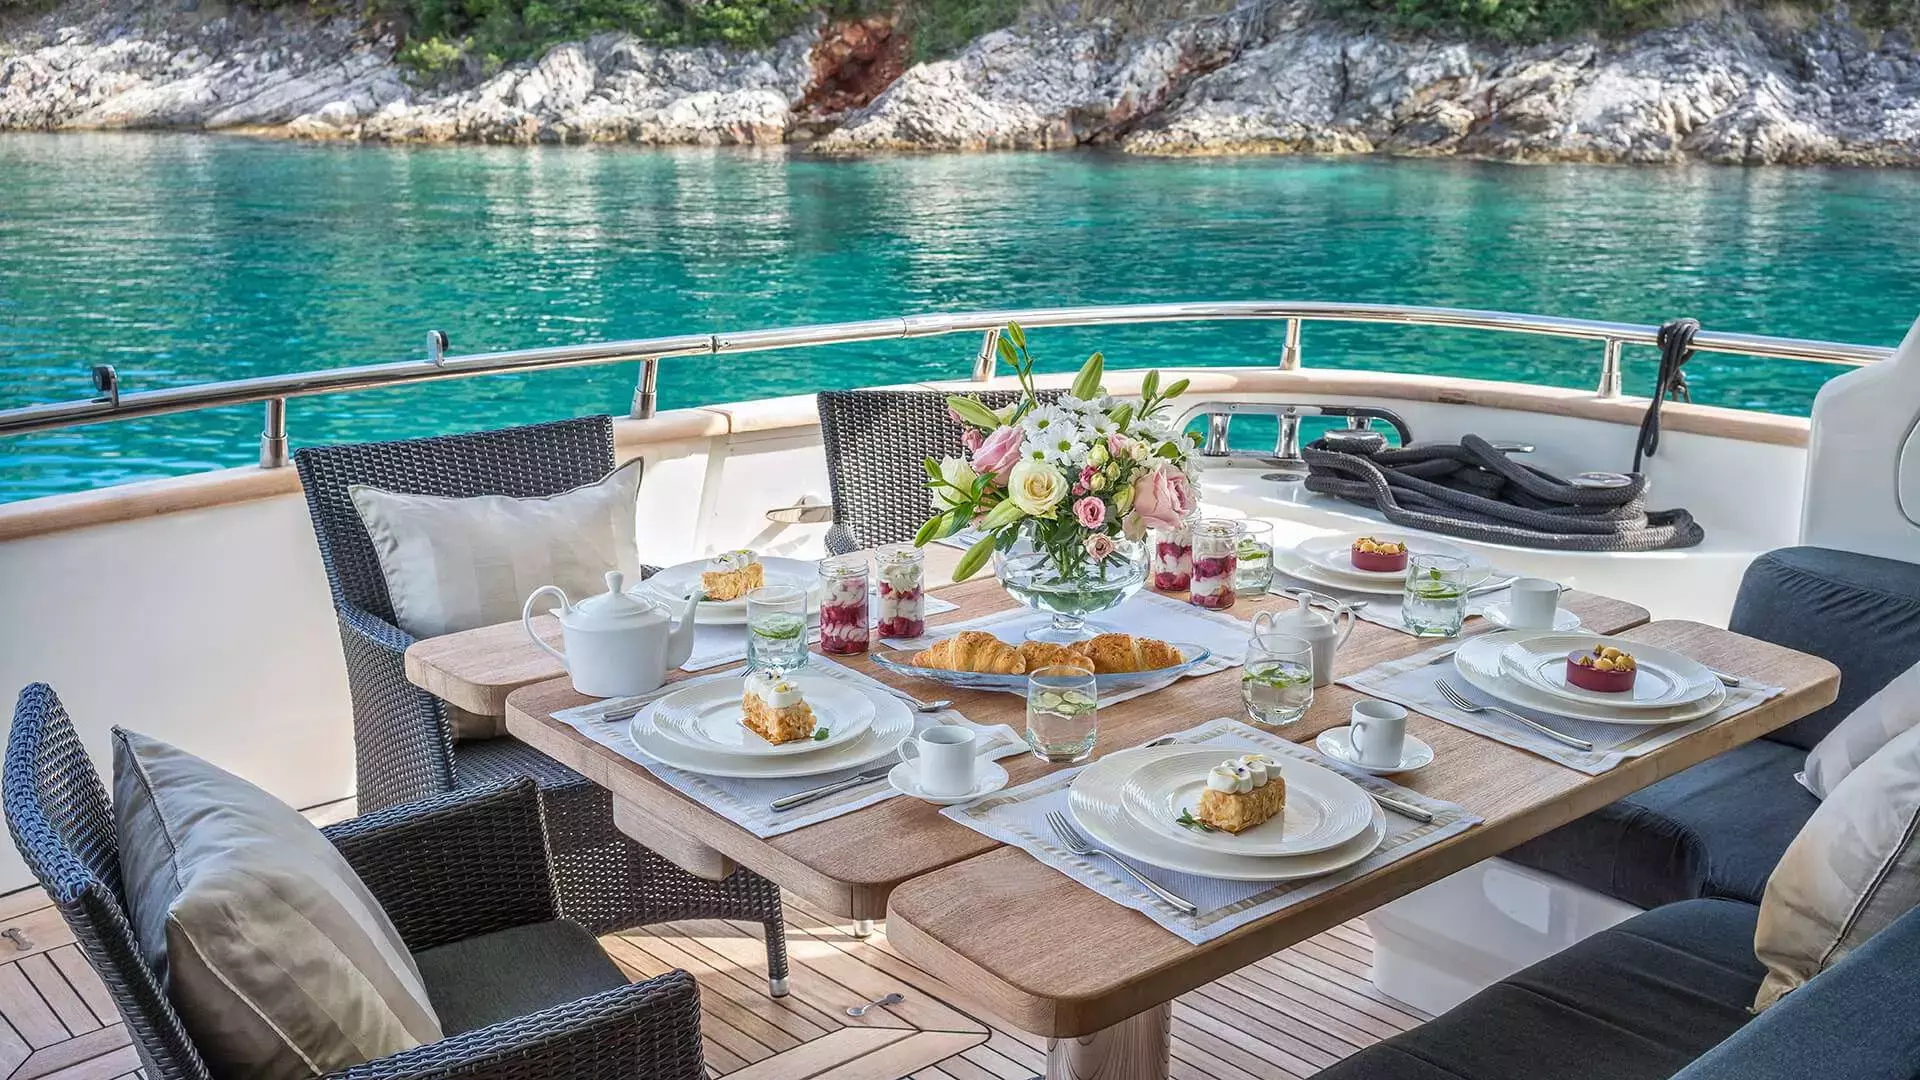 Jantar by Maiora - Special Offer for a private Motor Yacht Charter in Rogoznica with a crew